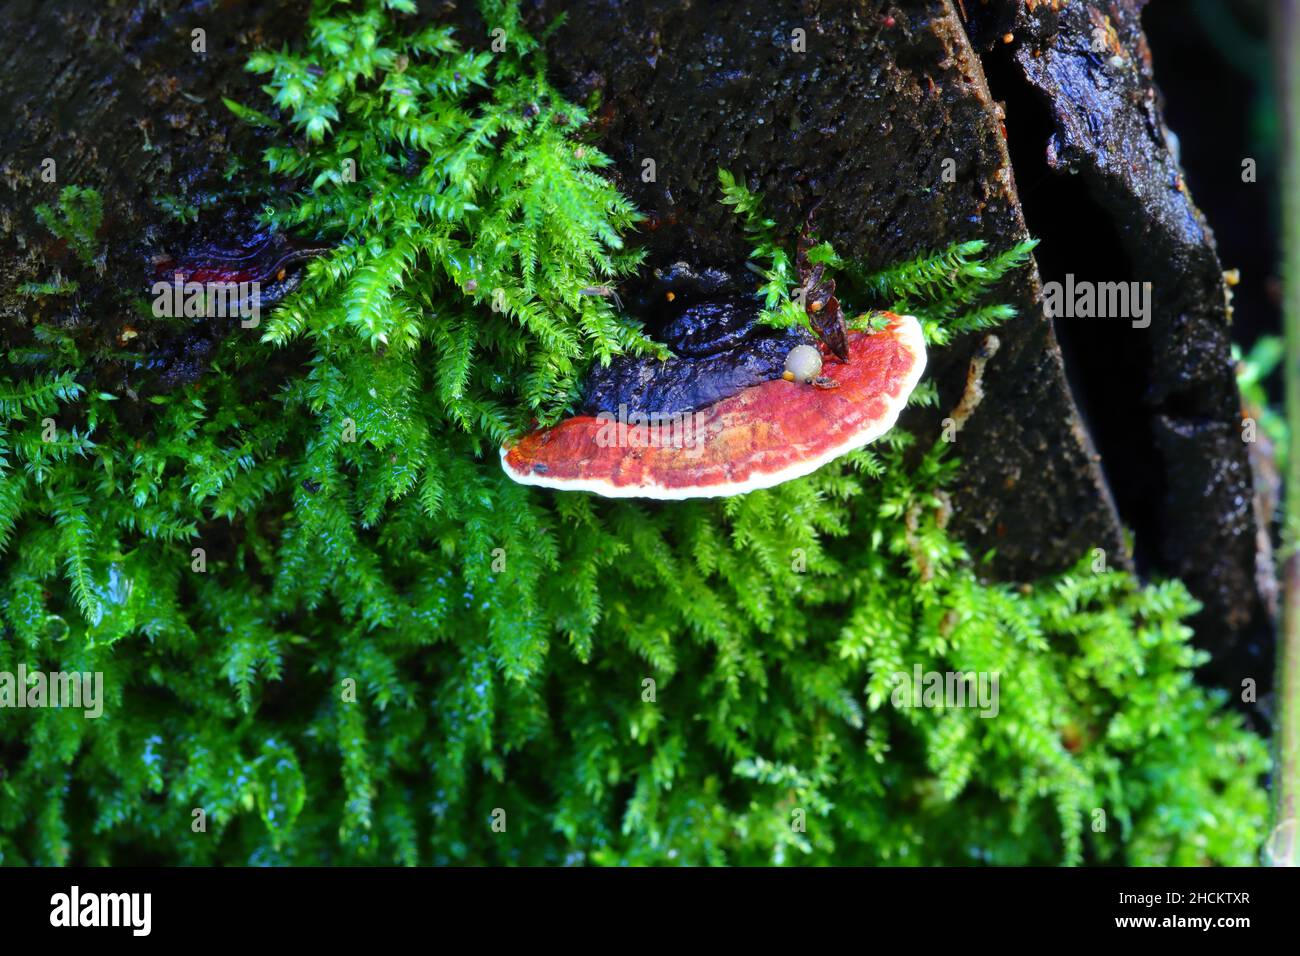 Close up image of Reishi or Lingzhi Fungi and Log Fern Growing out of Rotting Timber. Stock Photo